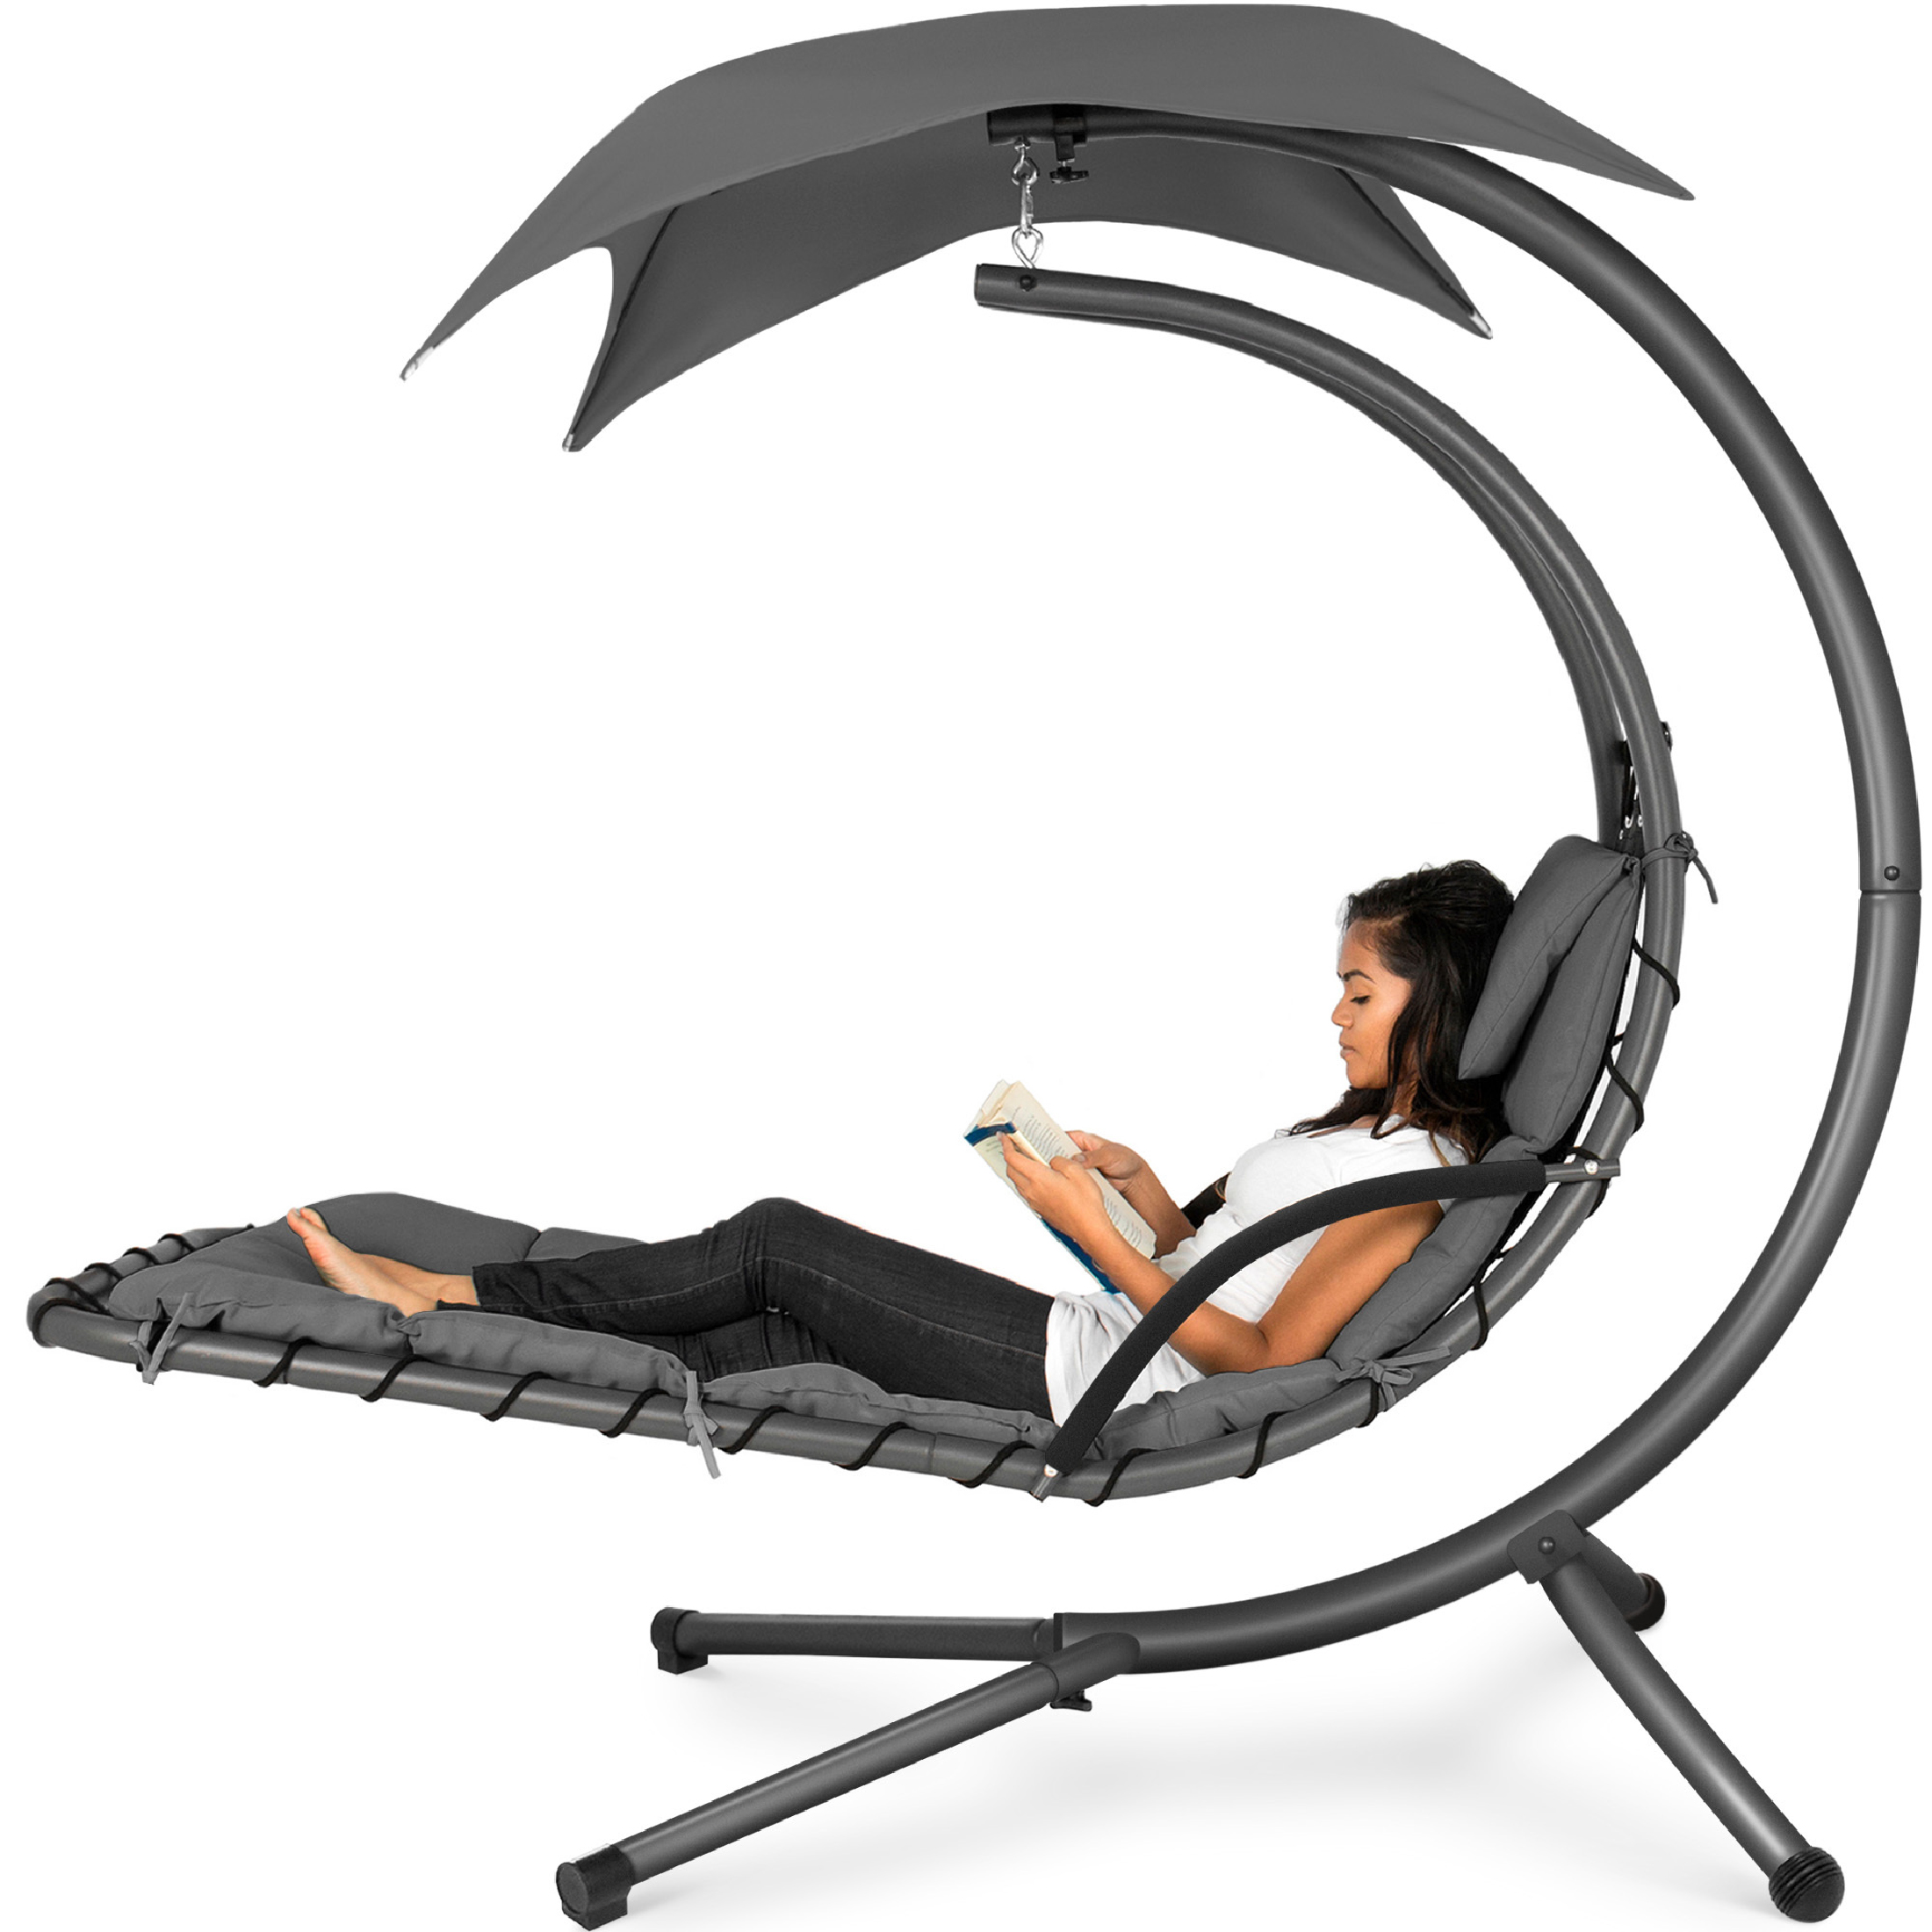 Best Choice Products Hanging Curved Chaise Lounge Chair Swing for Backyard w/ Pillow, Shade, Stand - Charcoal Gray - image 1 of 8